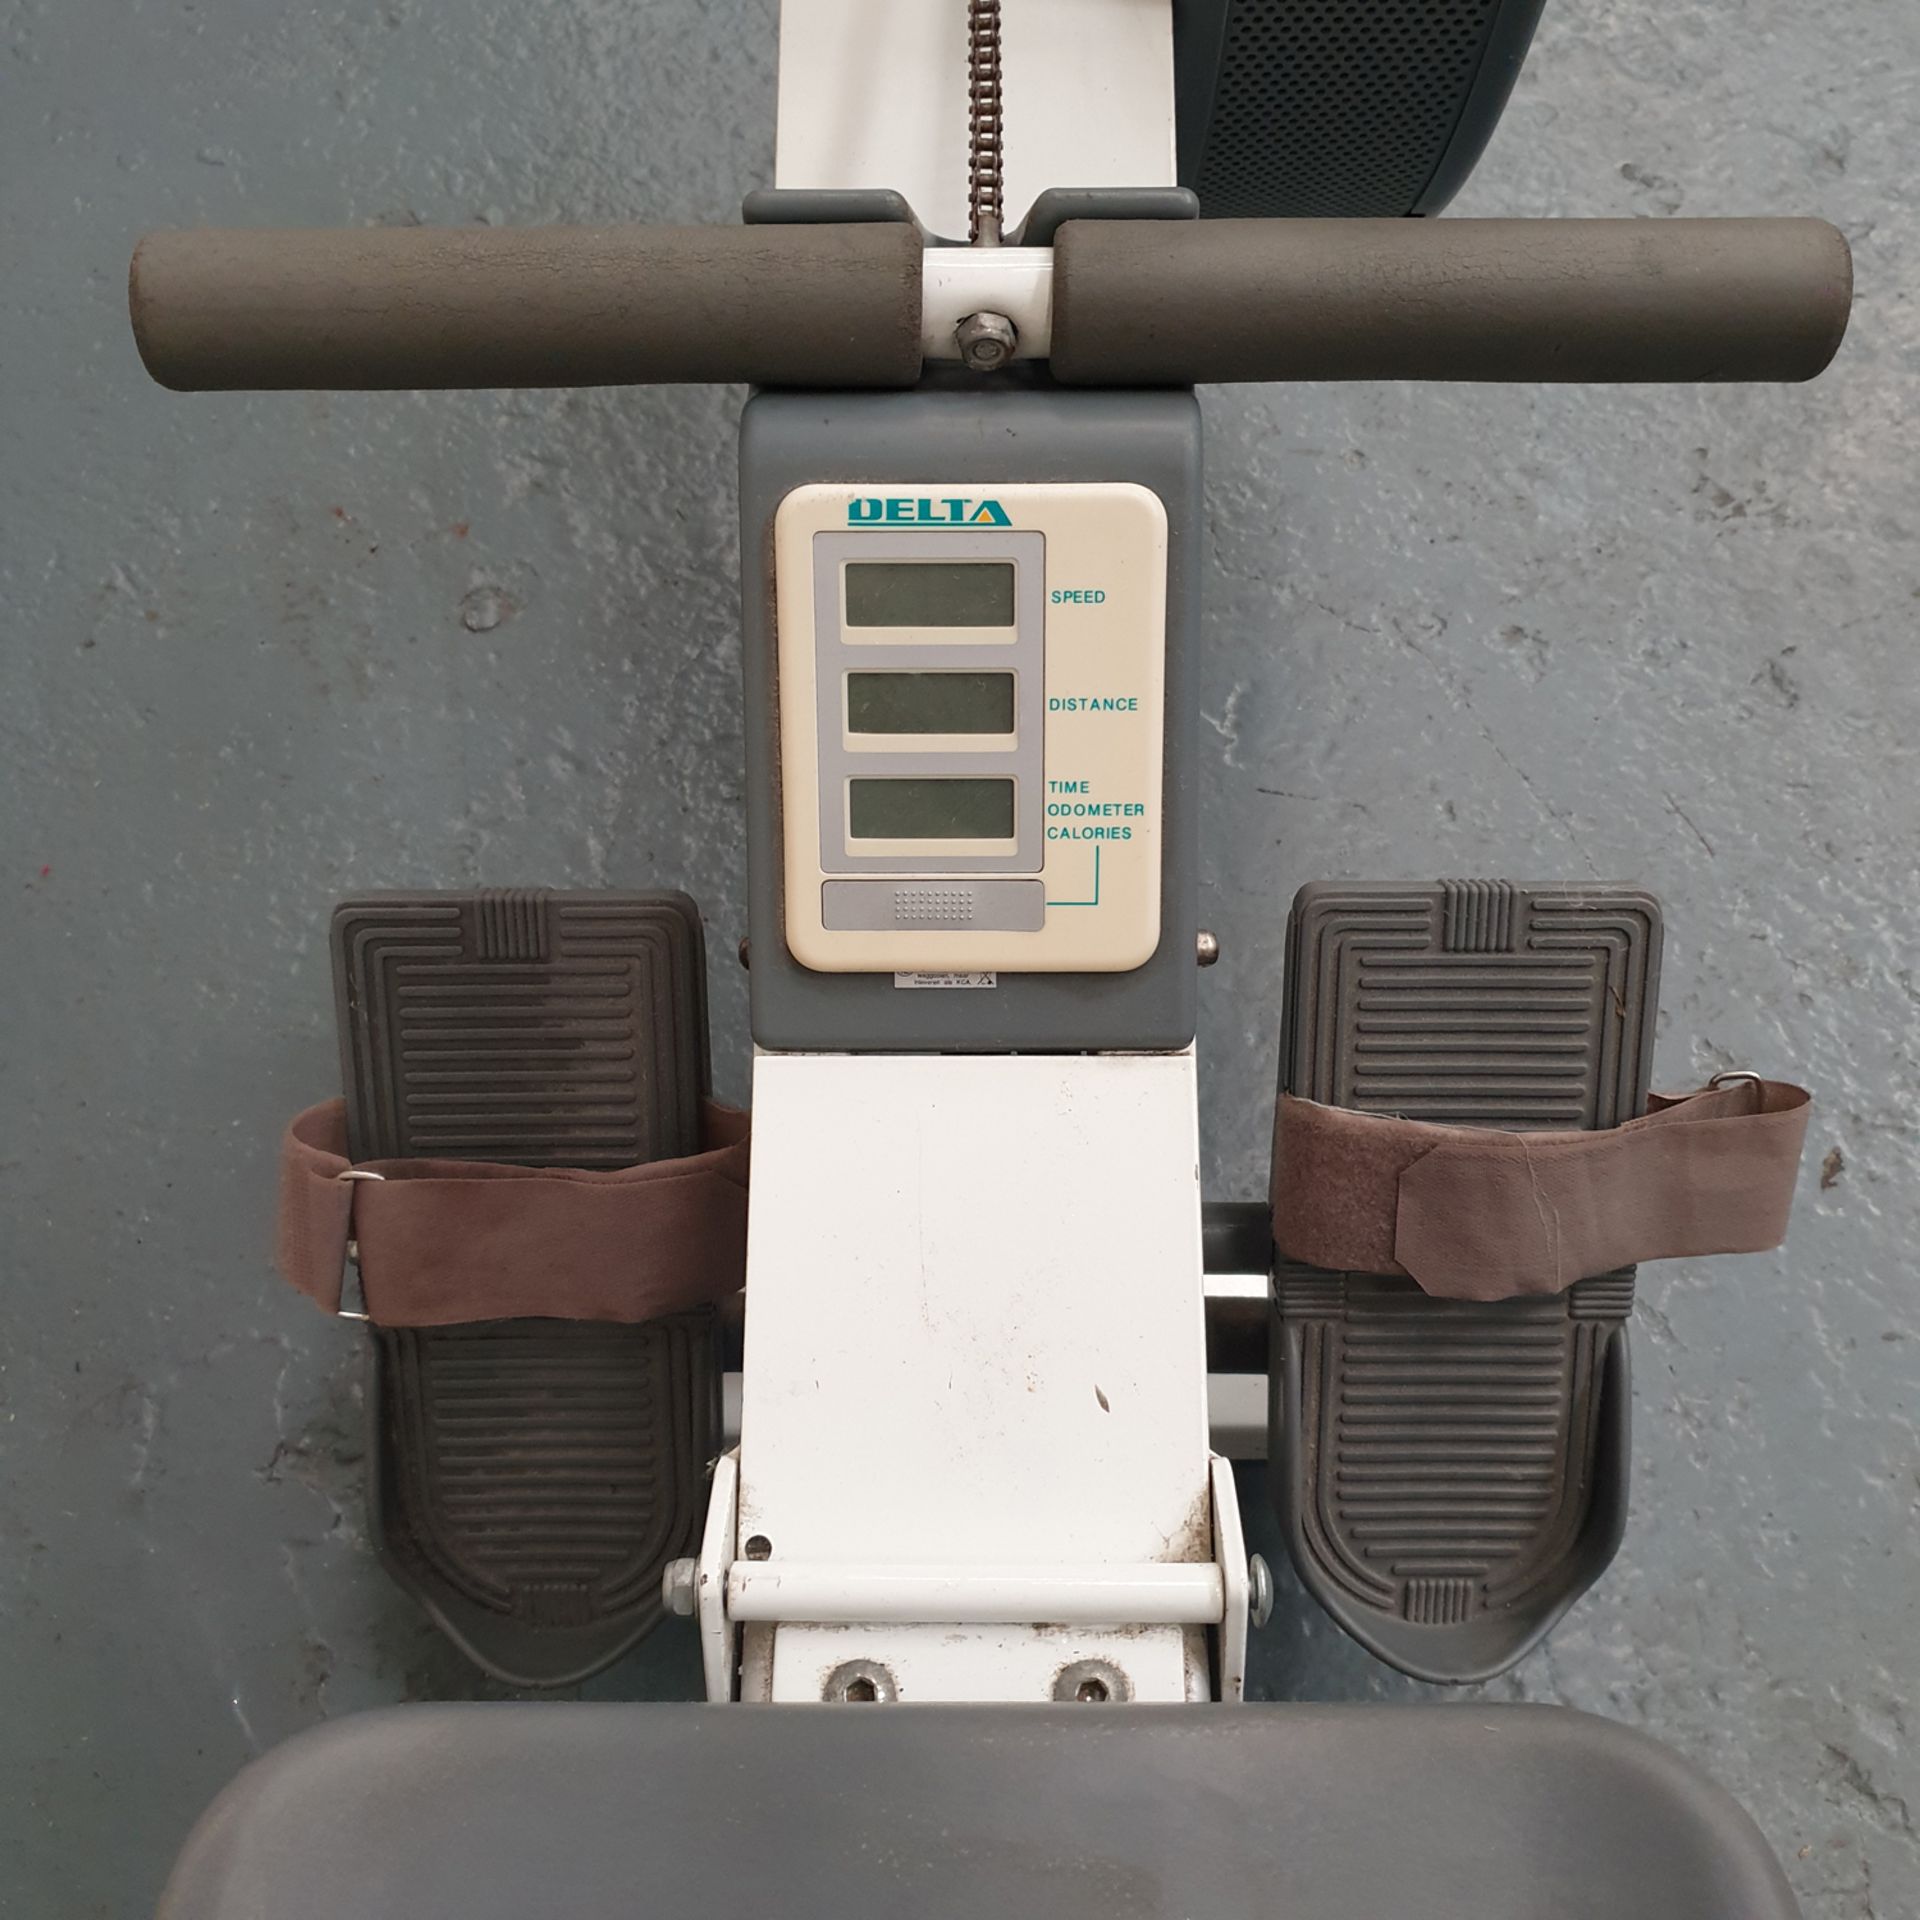 DELTA Air Rower Rowing Machine. Please Note This Item is for Spares and Repairs. - Image 3 of 5